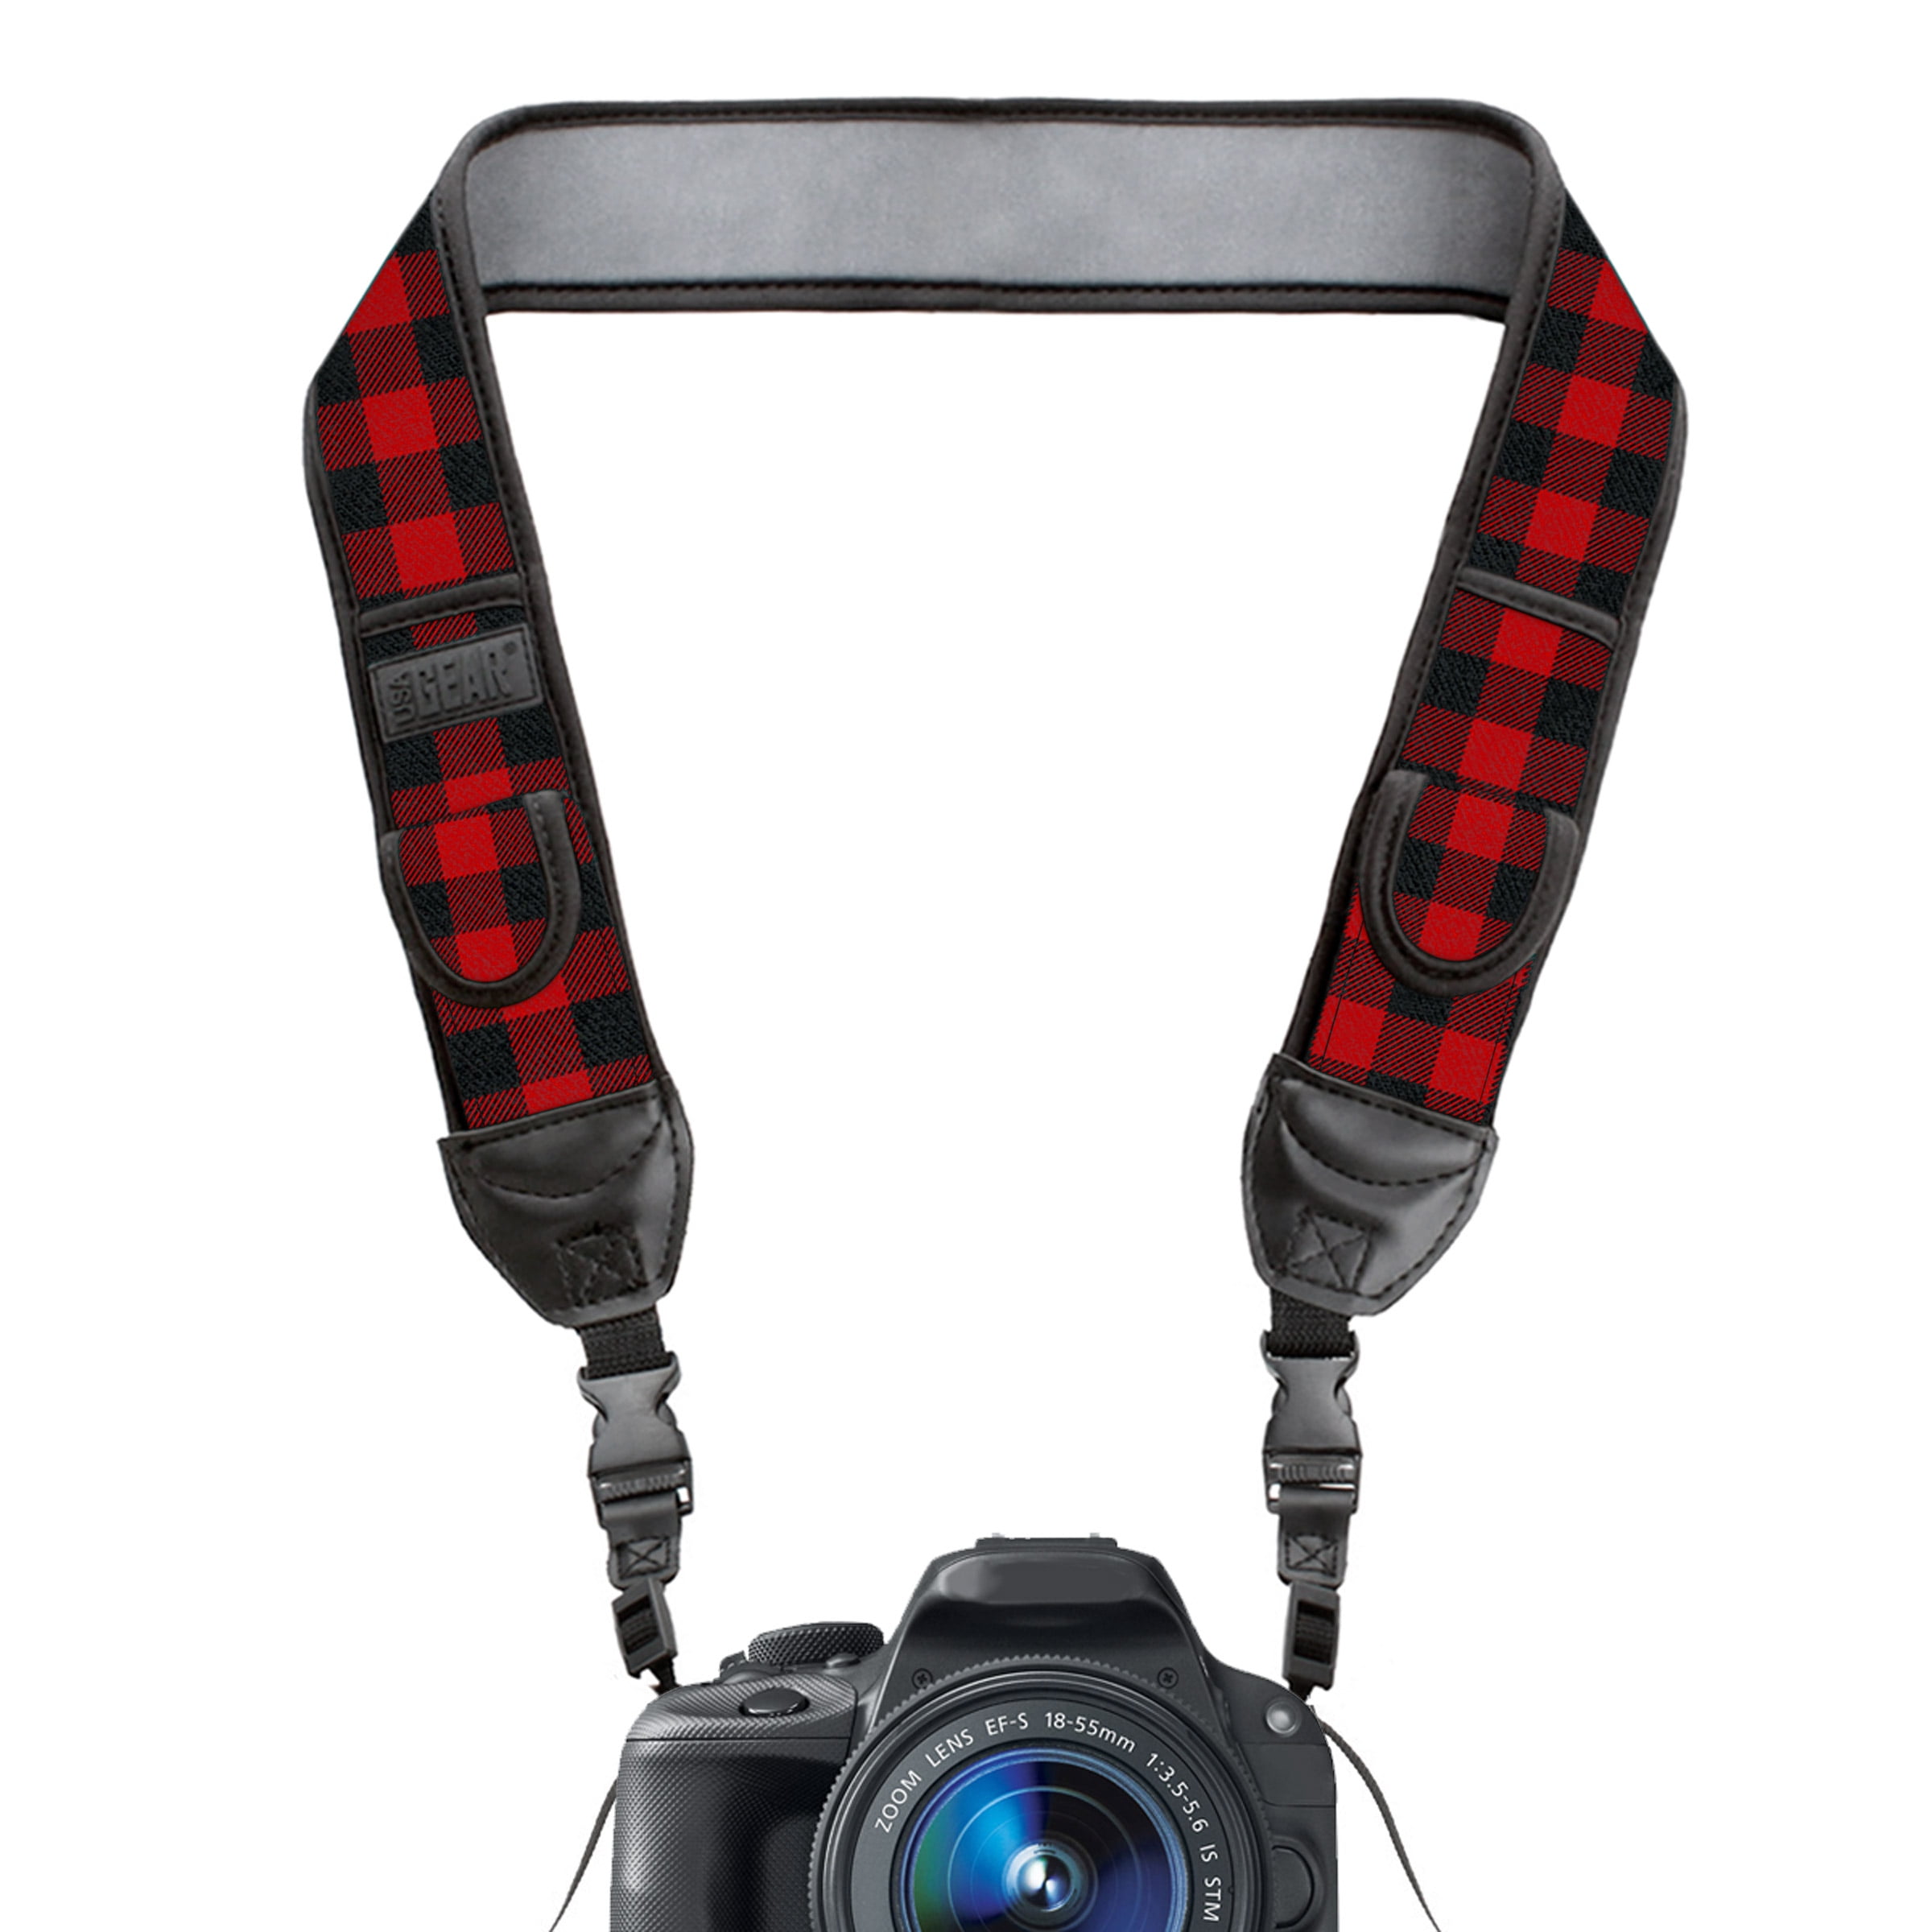 Nikon USA Gear DSLR Camera Strap Chest Harness with Quick Release Buckles Compatible with Canon Southwest Neoprene Pattern and Accessory Pockets Mirrorless Cameras Sony and More Point and Shoot 